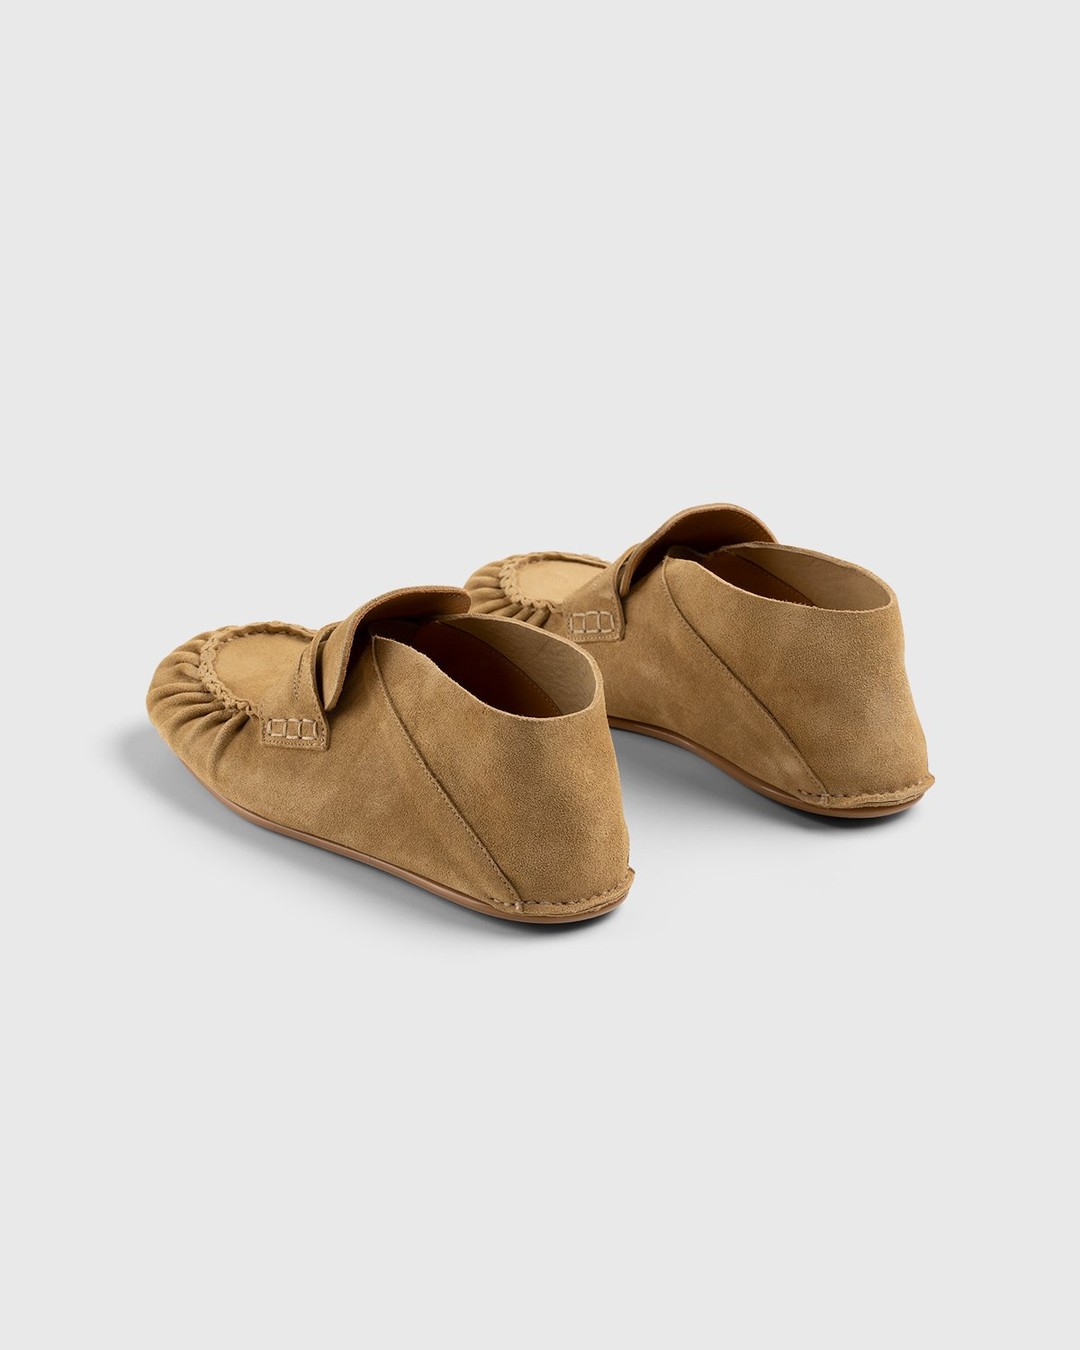 Loewe – Paula's Ibiza Suede Loafer Gold - Shoes - Brown - Image 5